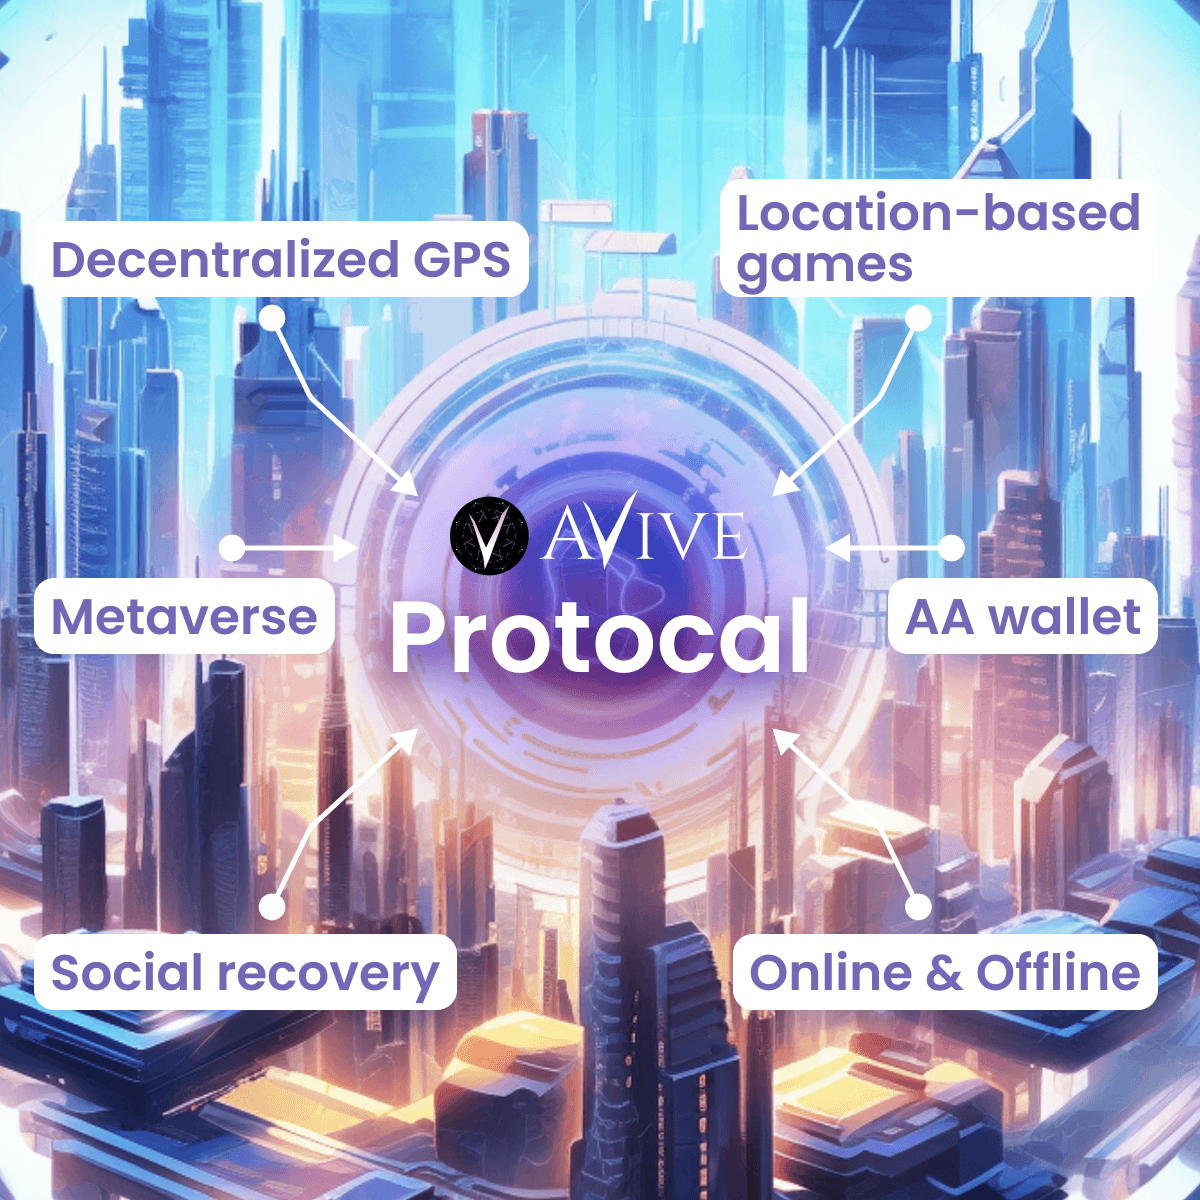 ✔With Avive protocol, the integration of offline and online worlds is no longer a dream. 

🧬Explore the potential of decentralized GPS, immersive mapping, and location-based gaming, all powered by the magic of #Web3. 

#Avive  #Innovation #blockchain